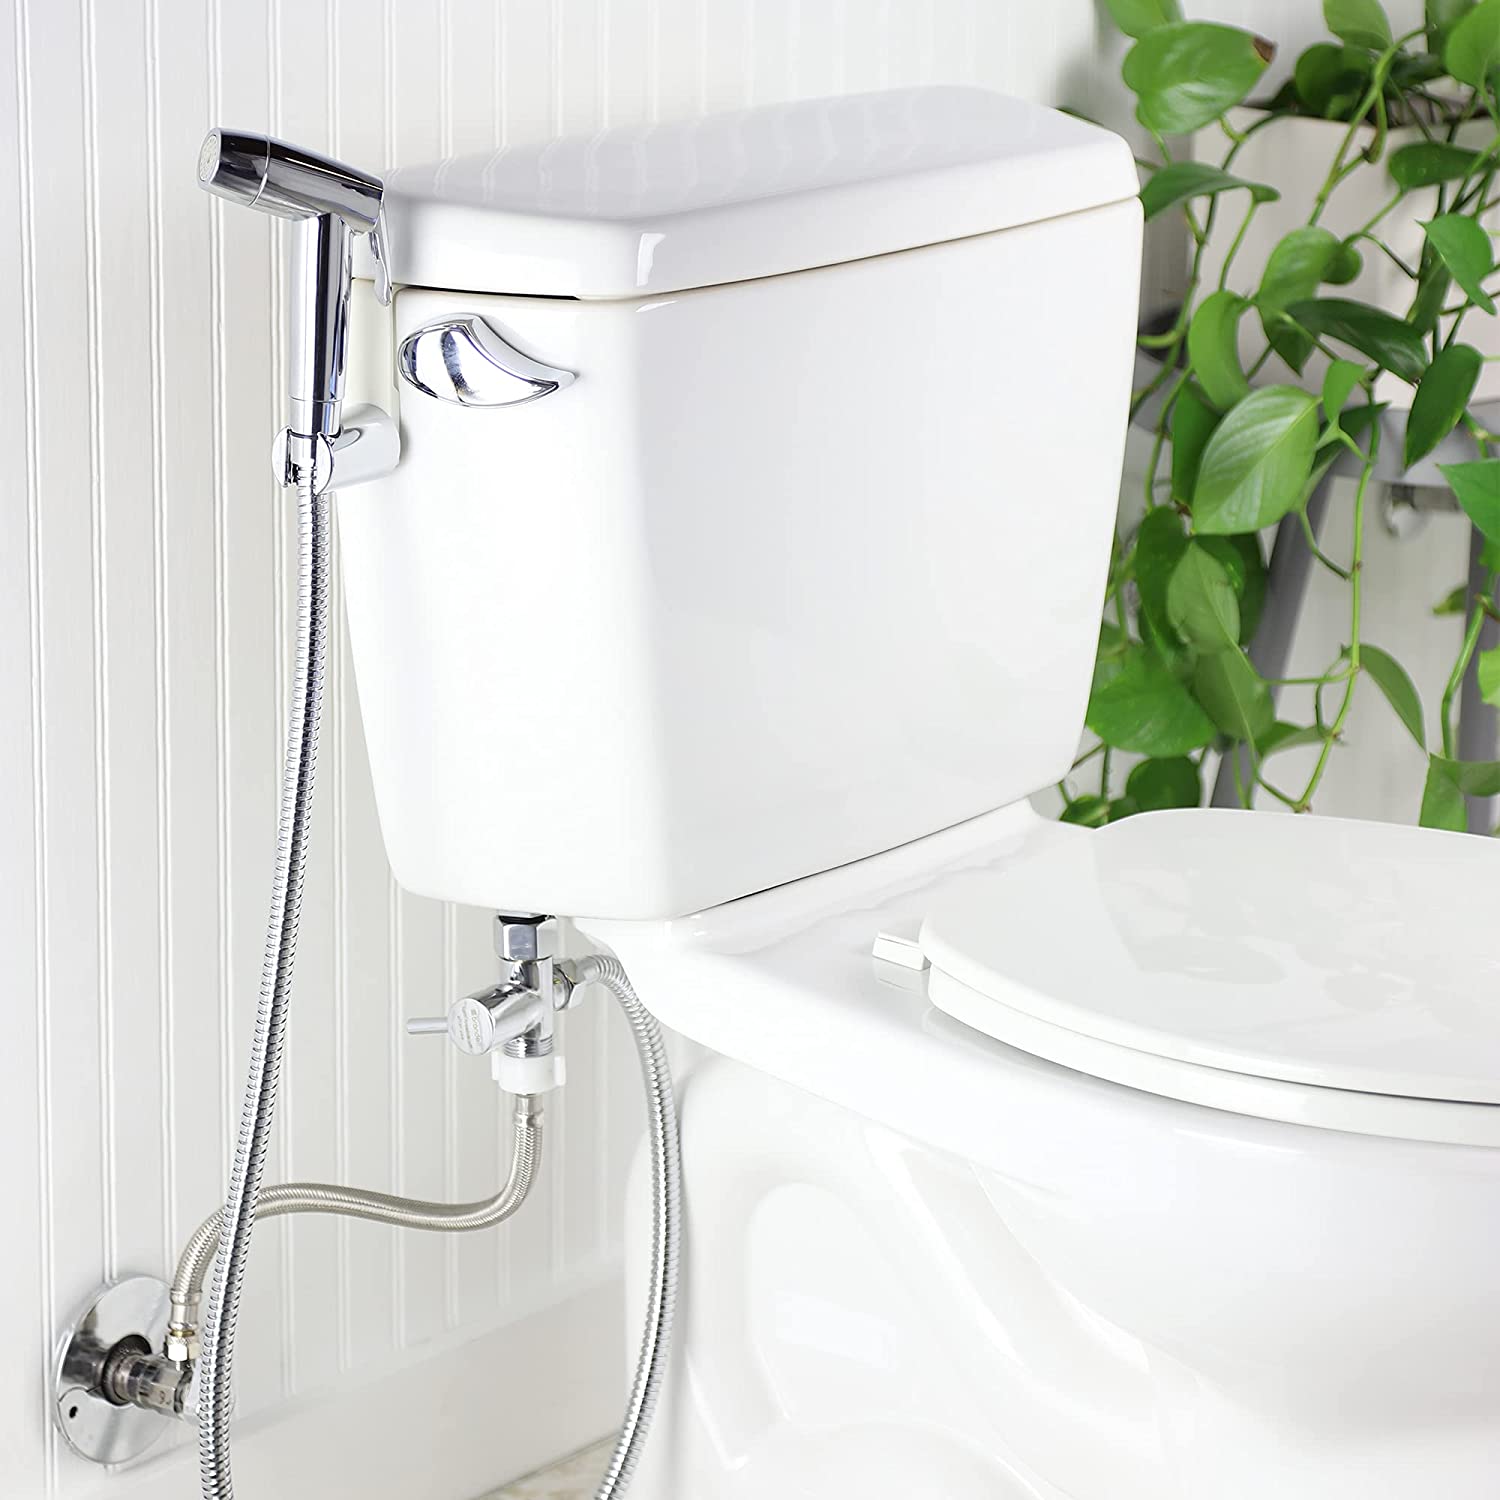 How to Use a Hand Held Bidet